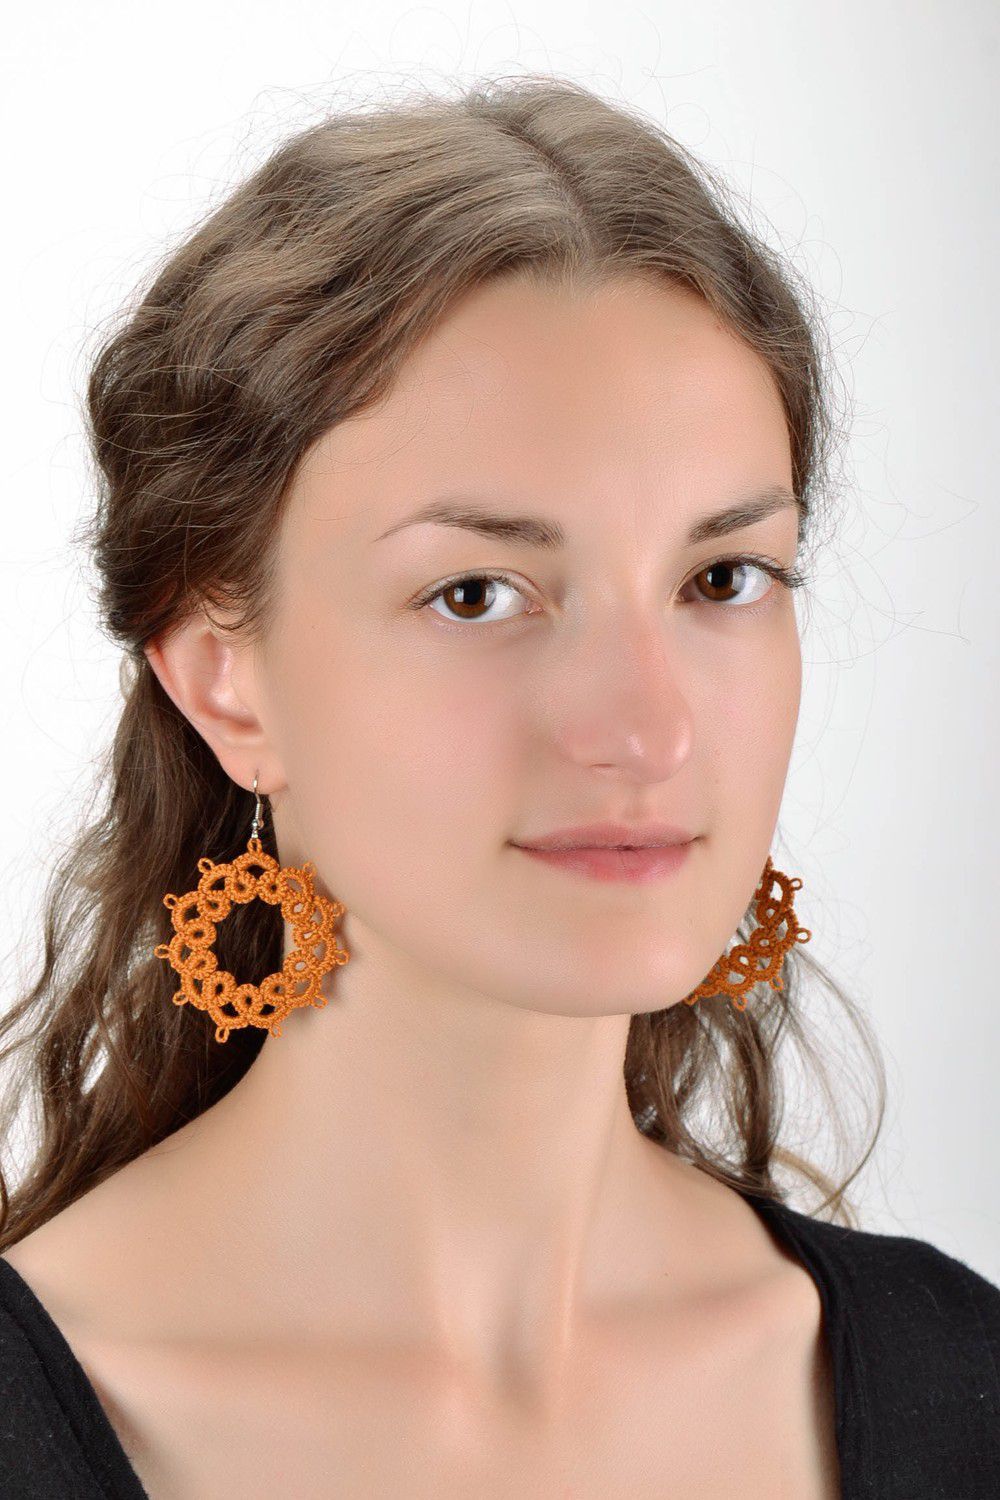 Earrings made from woven lace Little star photo 5